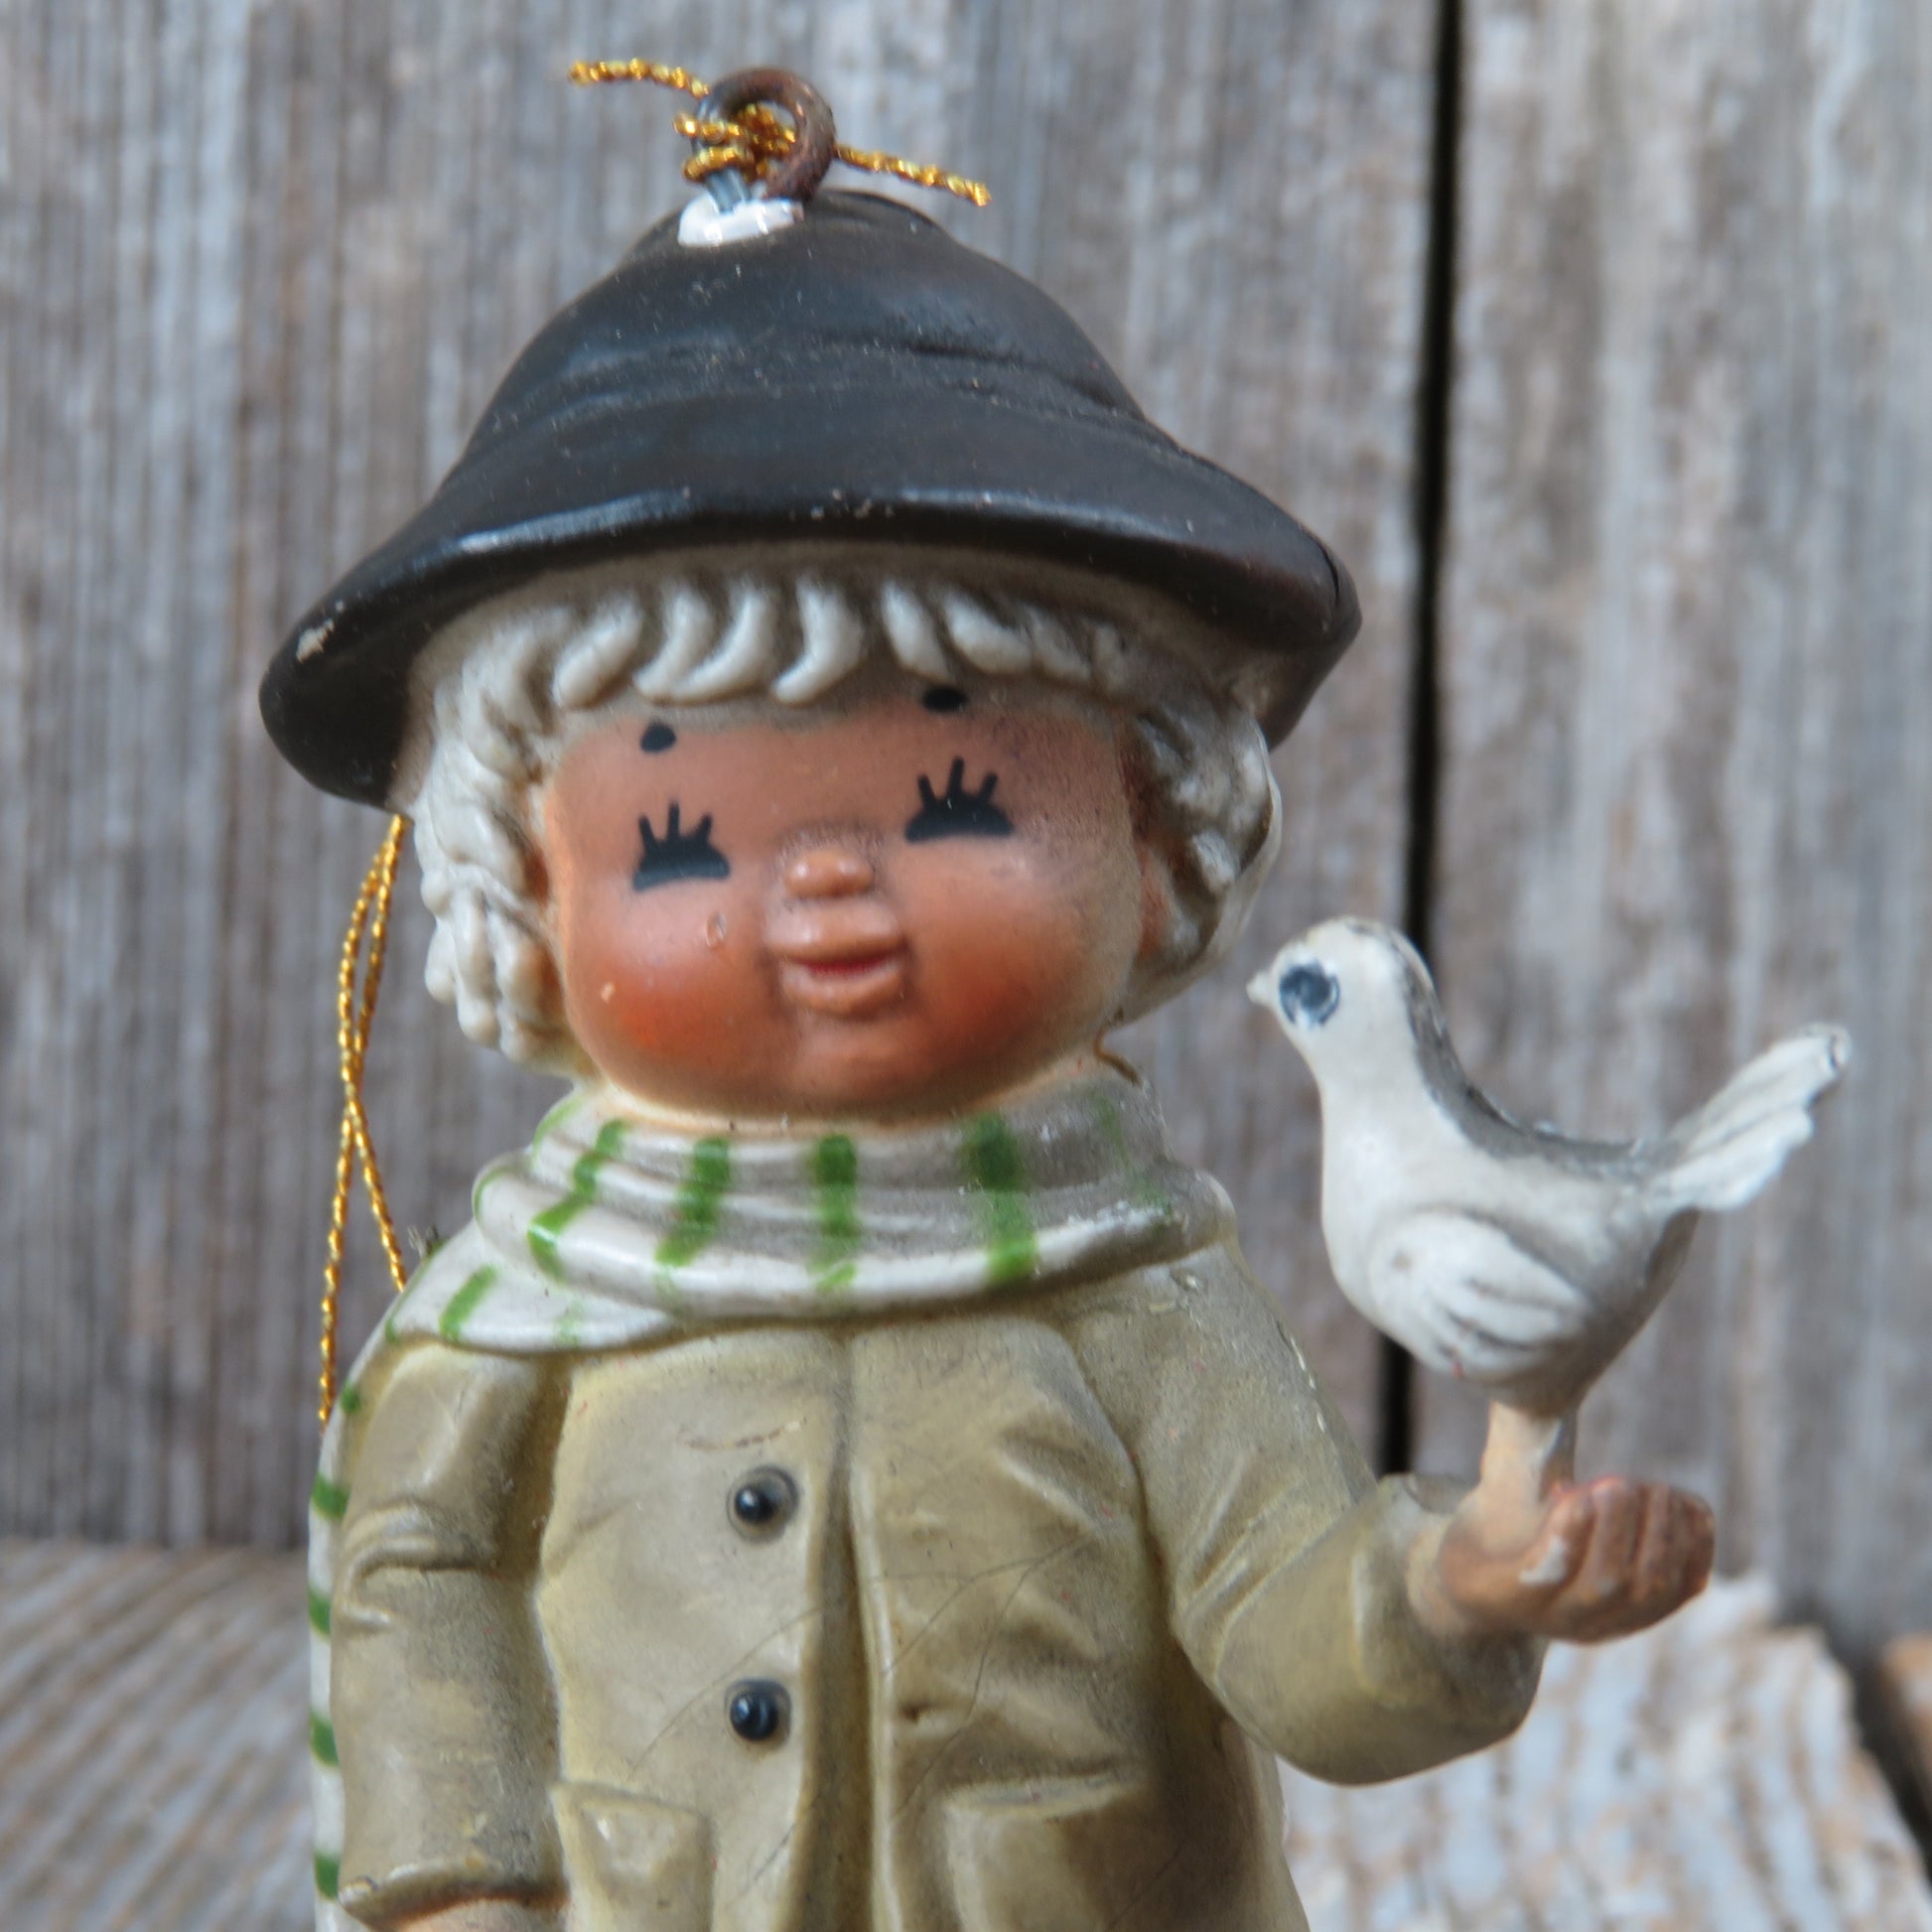 Vintage Boy with Dove Bird Christmas Ornament 1983 Bradford With Scarf and Hat - At Grandma's Table